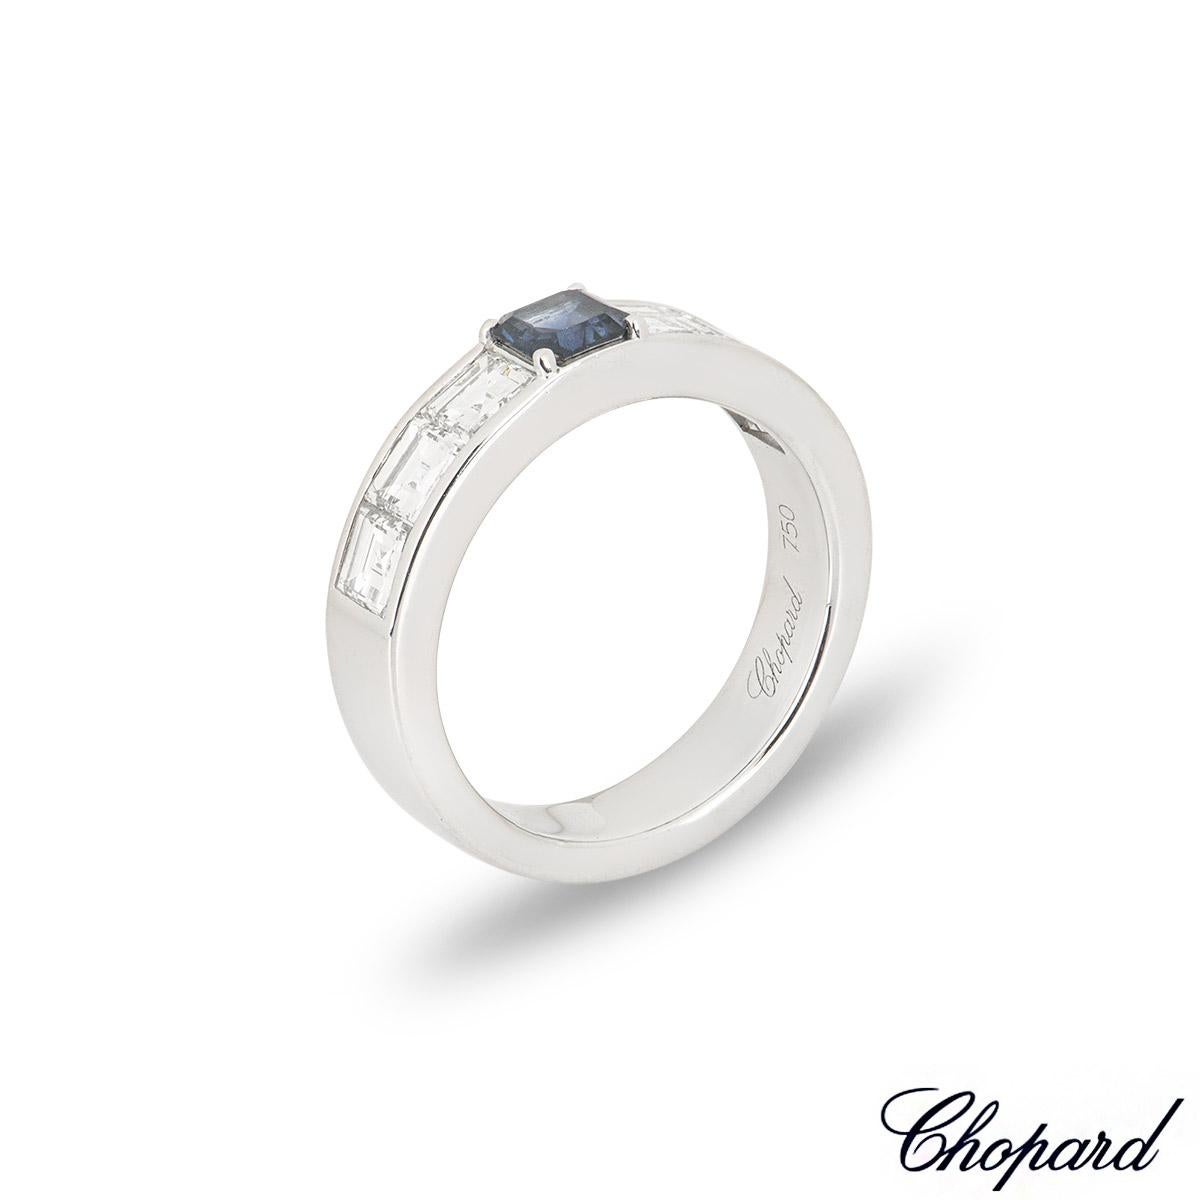 A versatile 18k white gold sapphire and diamond ring by Chopard. The ring is set to the centre with an asscher cut sapphire weighing 0.53ct, displaying a rich blue hue. Complementing the sapphire are 6 asscher cut diamonds channel set to the